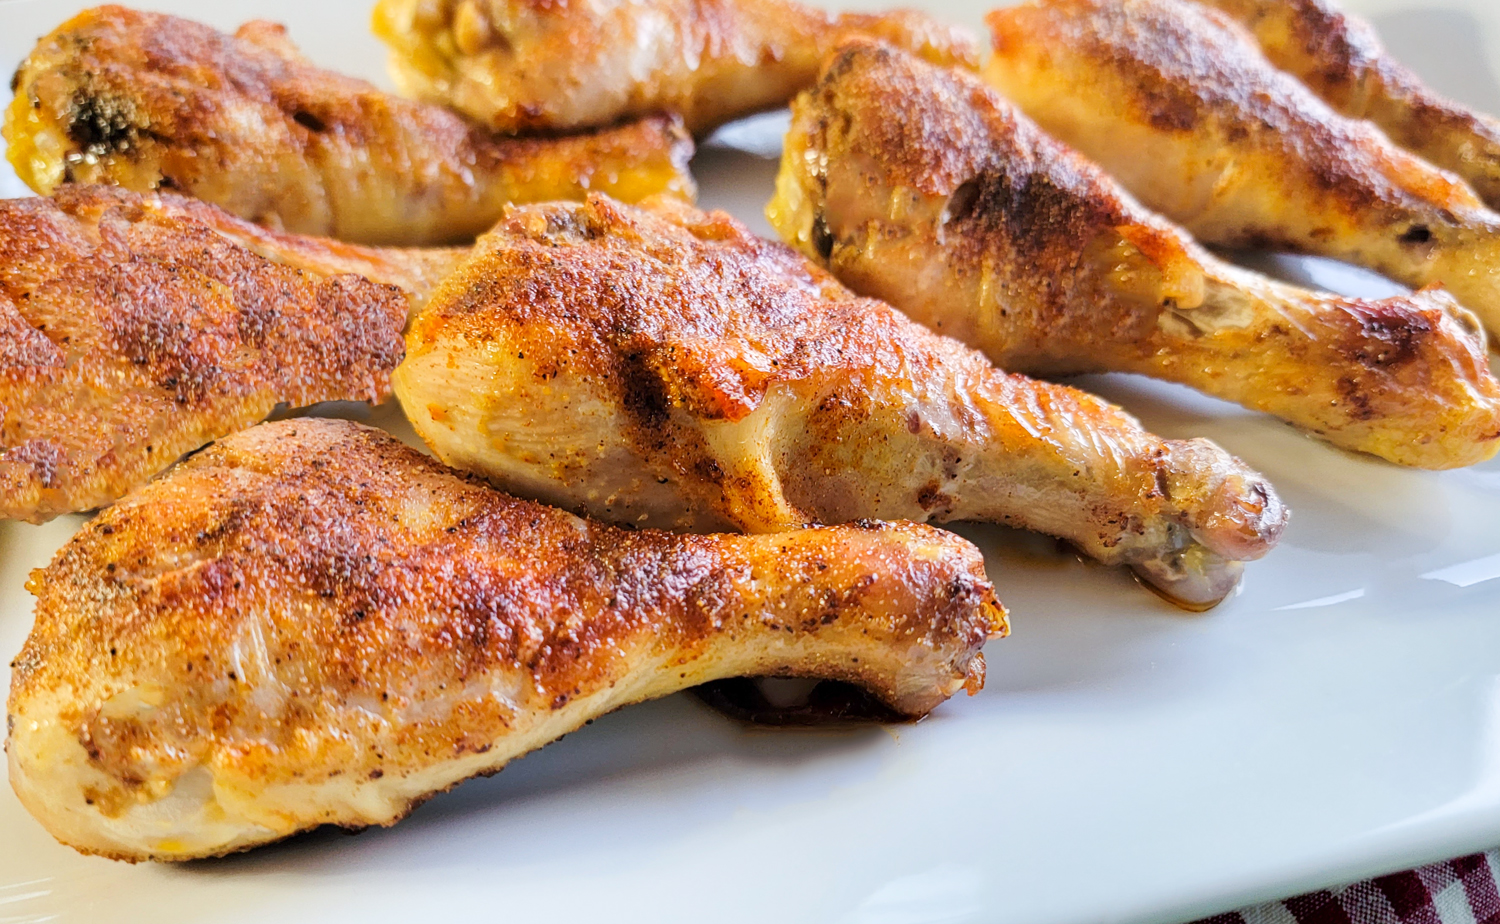 dry rub chicken legs in oven or air fryer or grill or smoker 